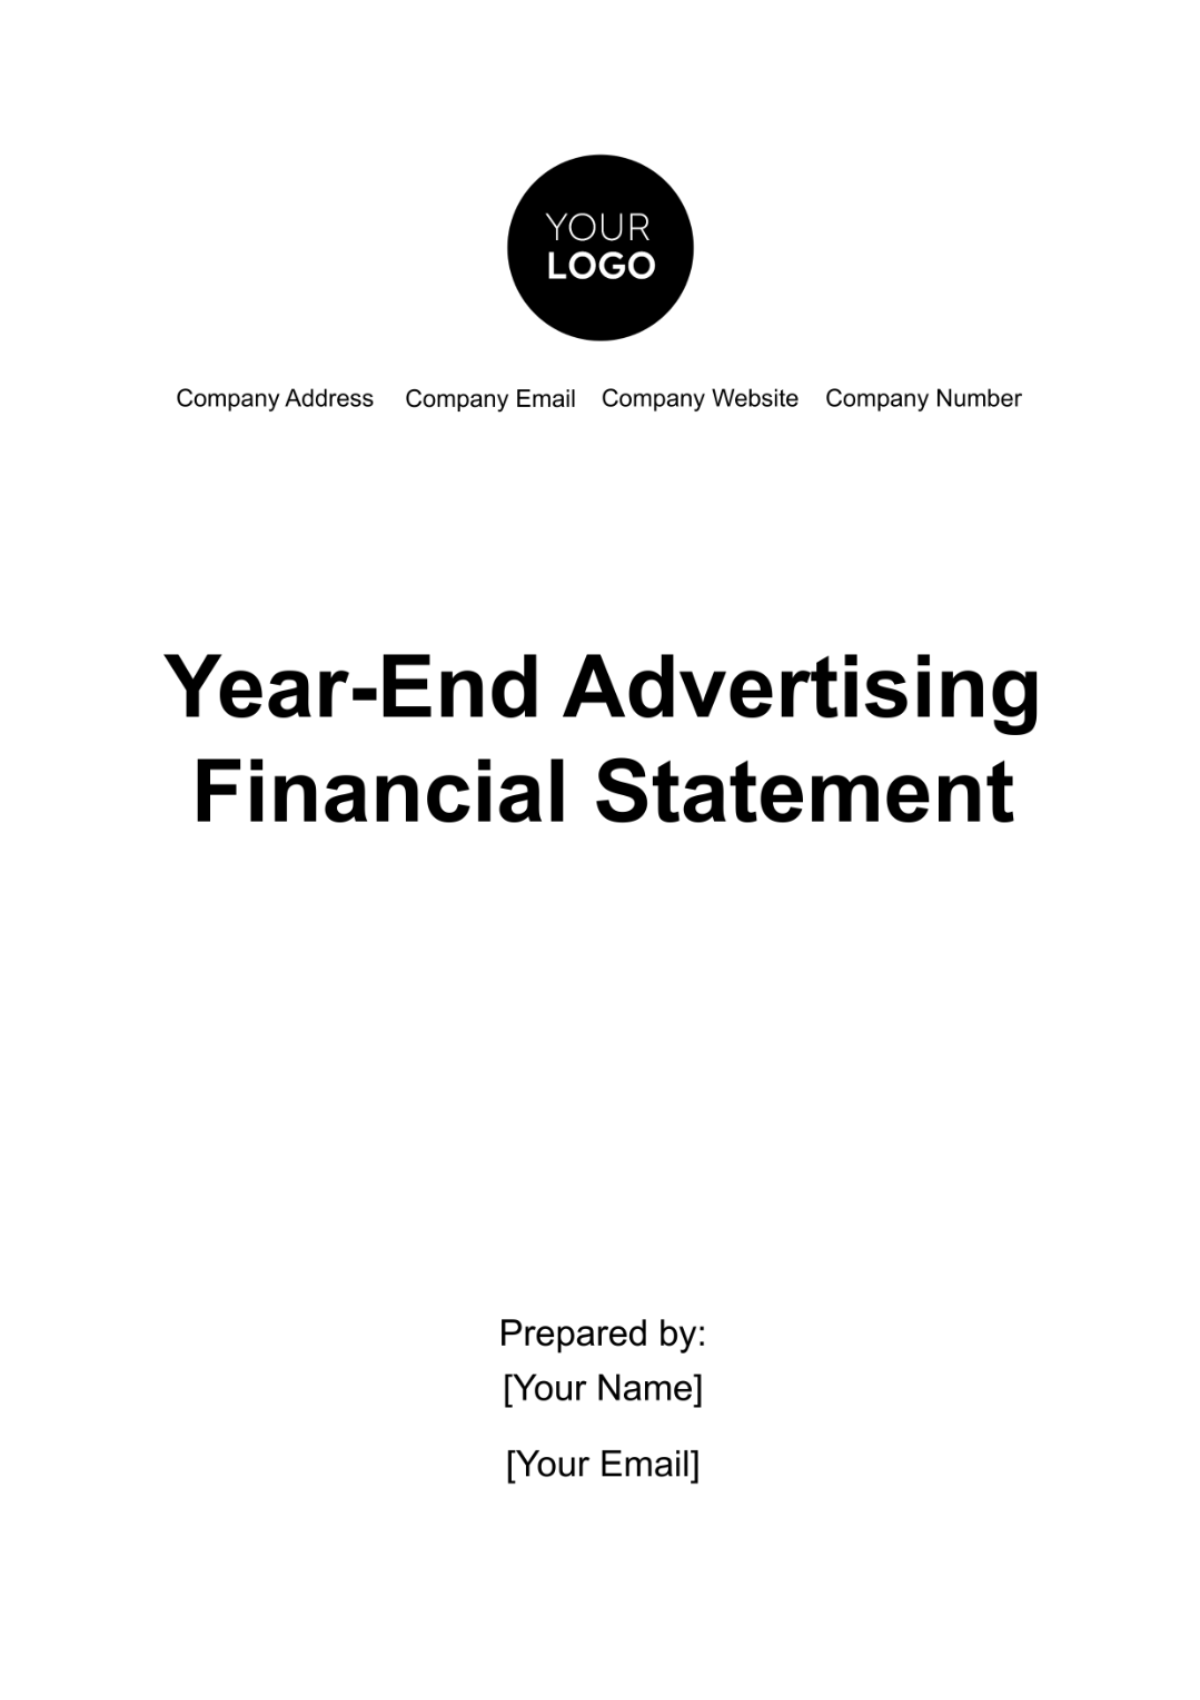 Year-End Advertising Financial Statement Template